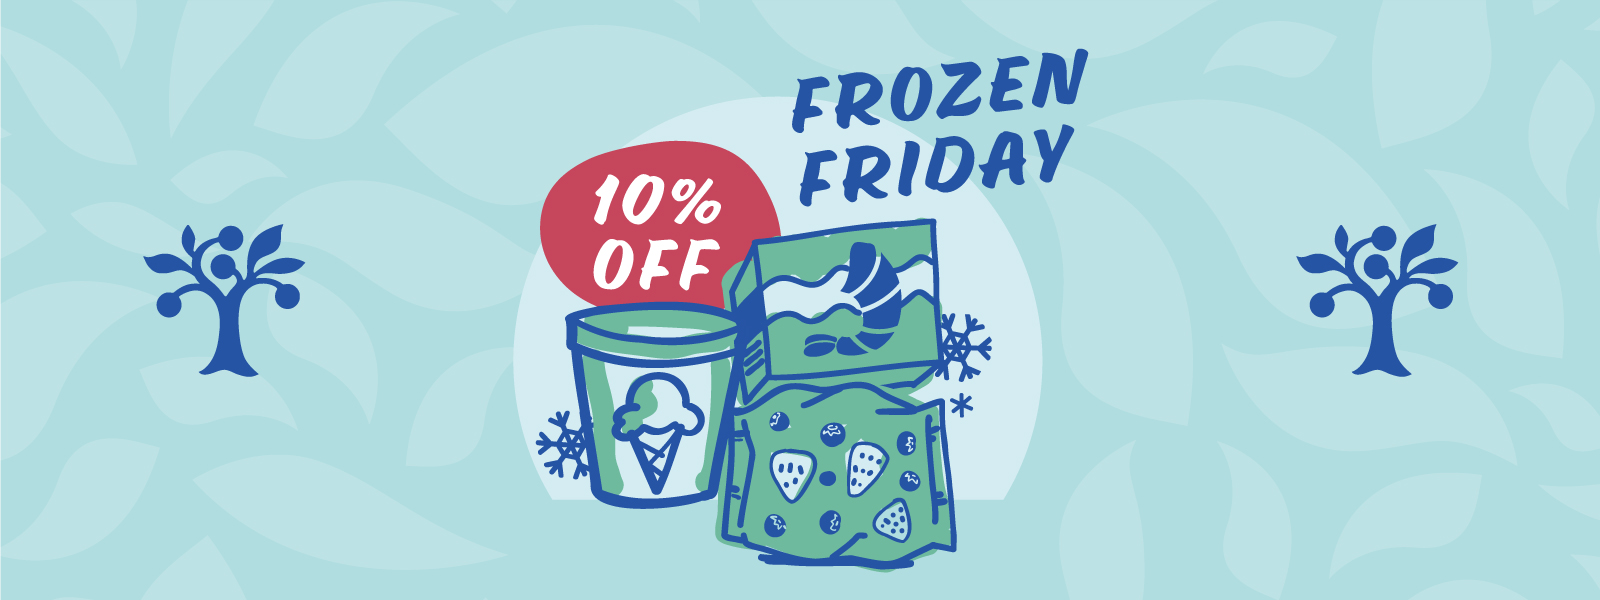 An illustration of frozen foods with text reading "Frozen Friday" and "10% off"